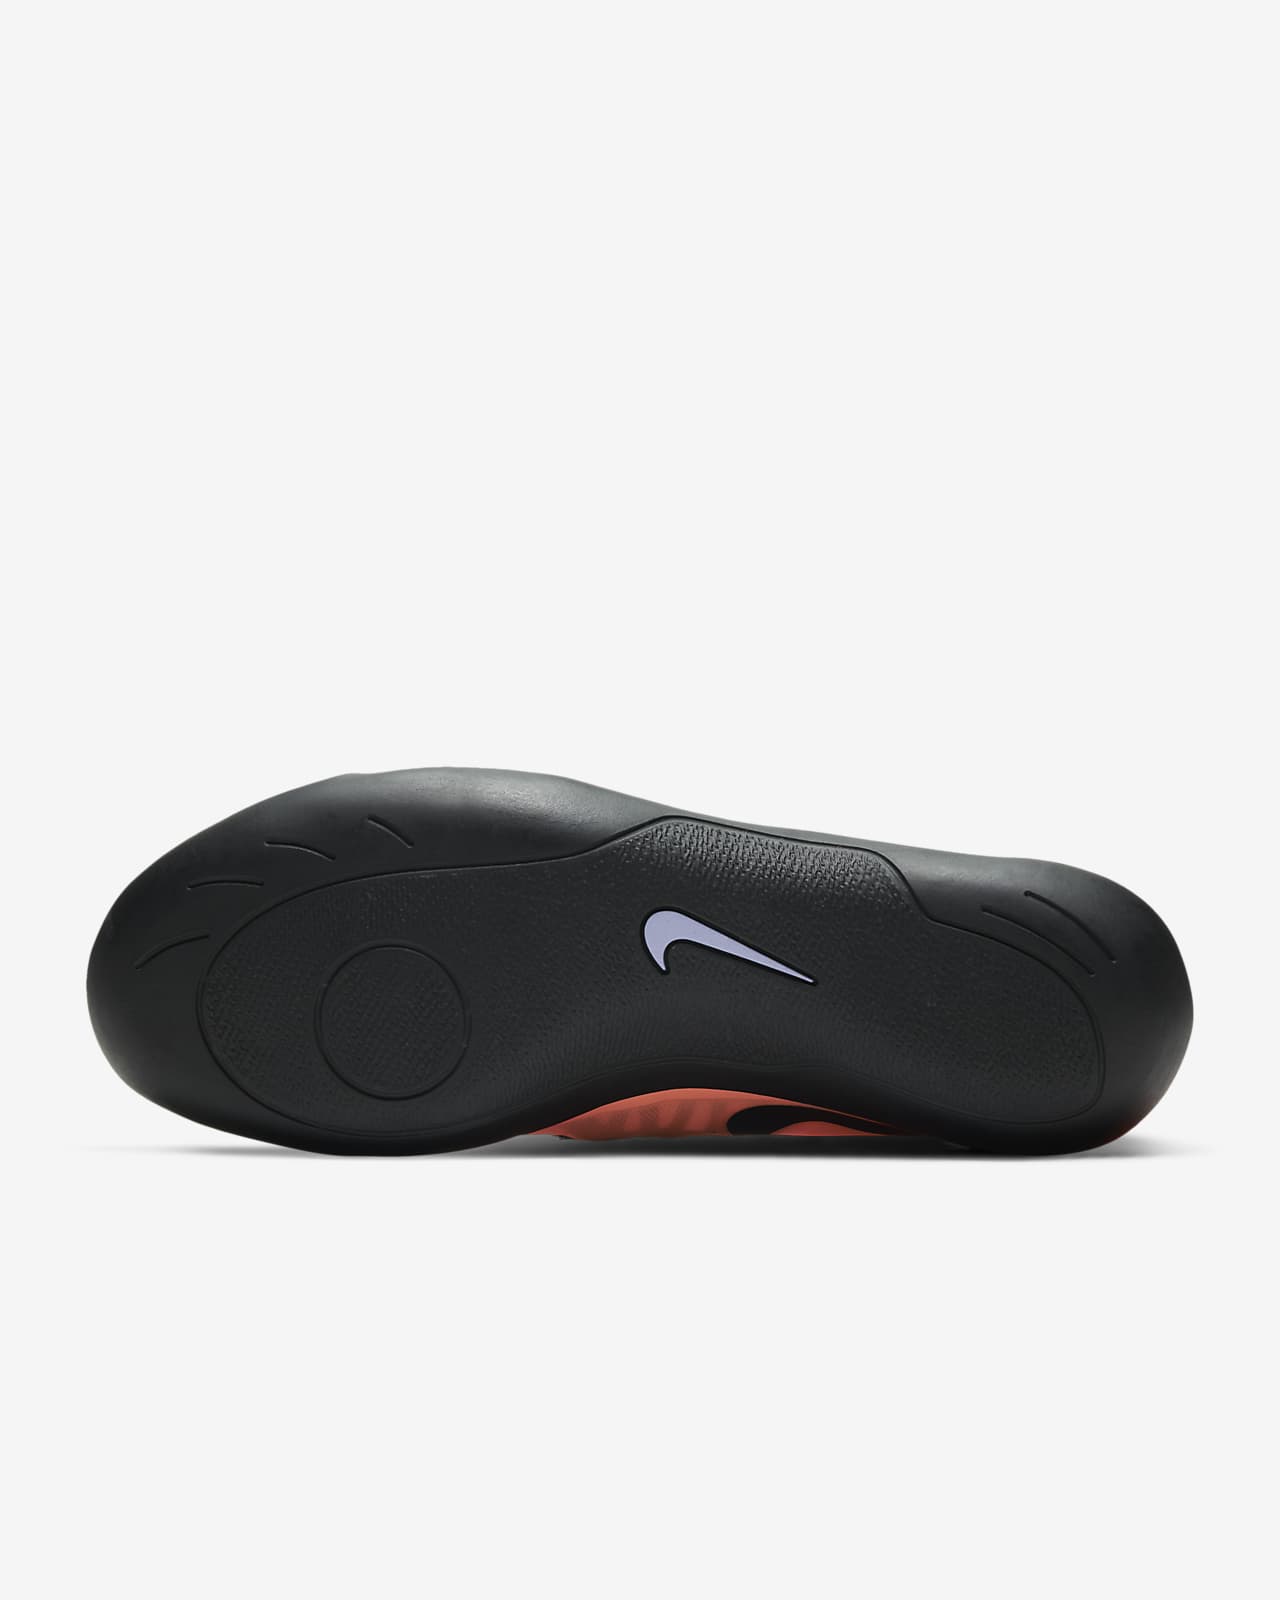 nike zoom rival sd 2 throwing shoes